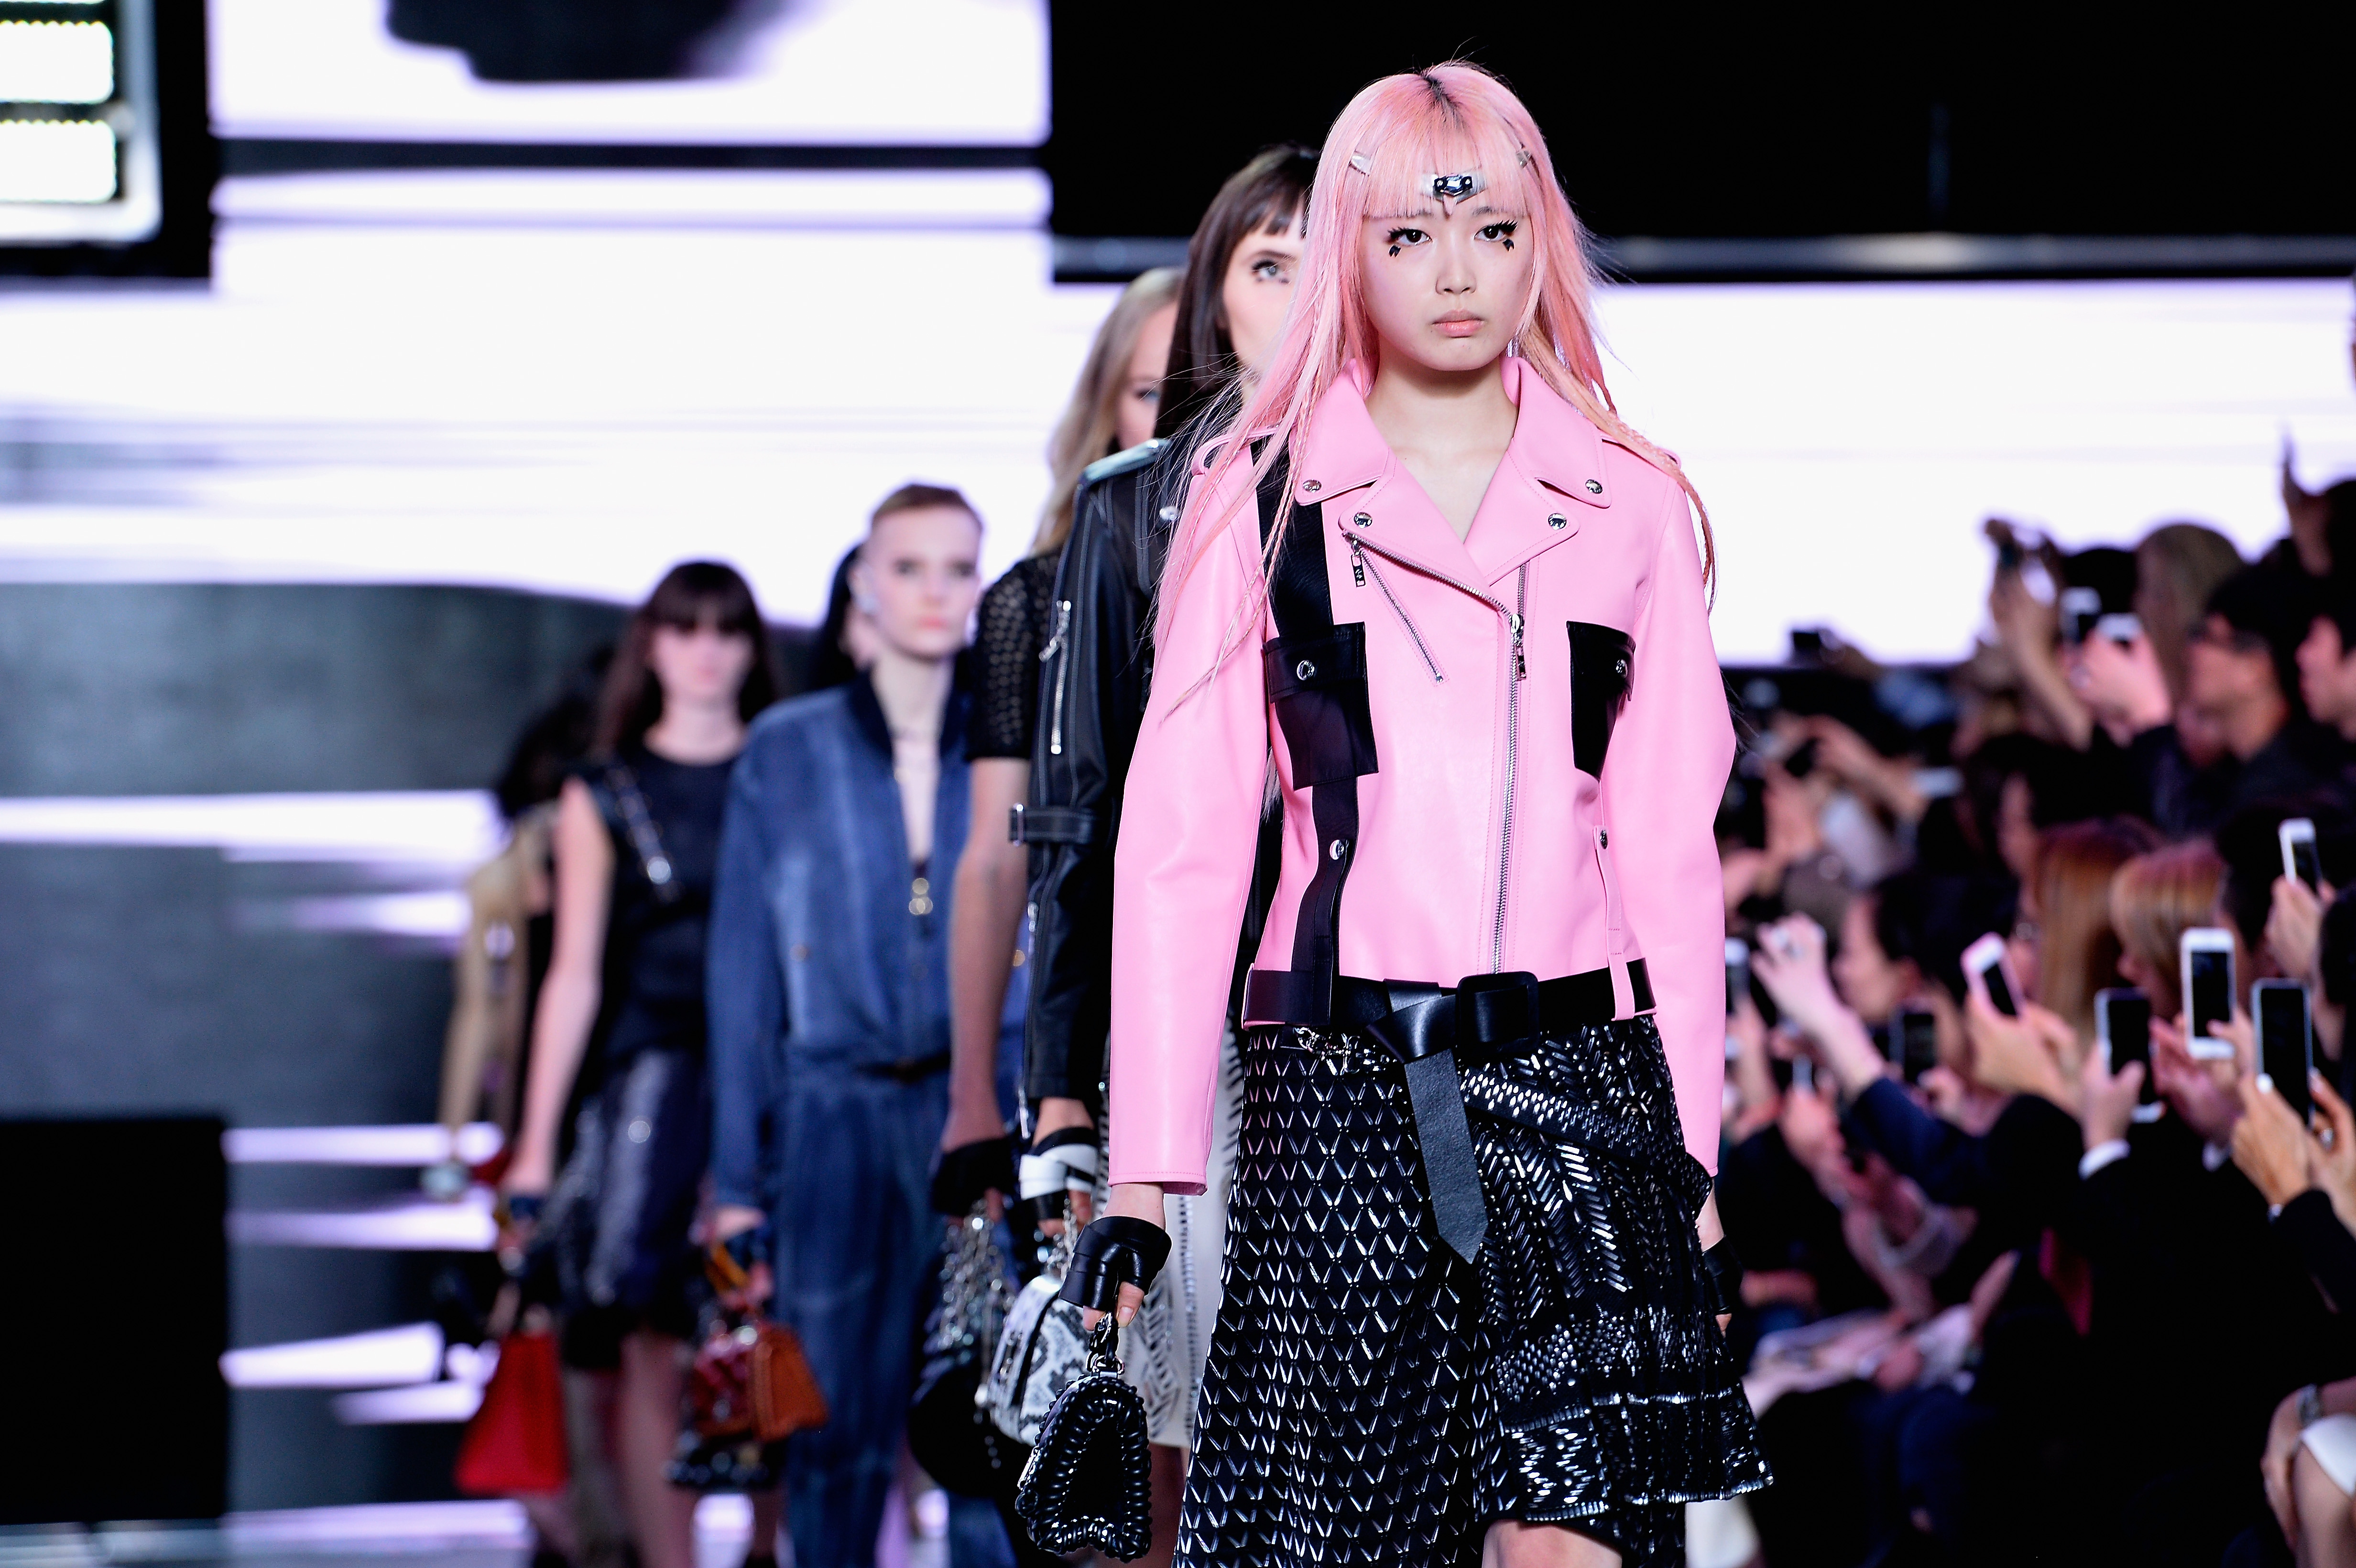 Vuitton's new is a Final Fantasy character - Style